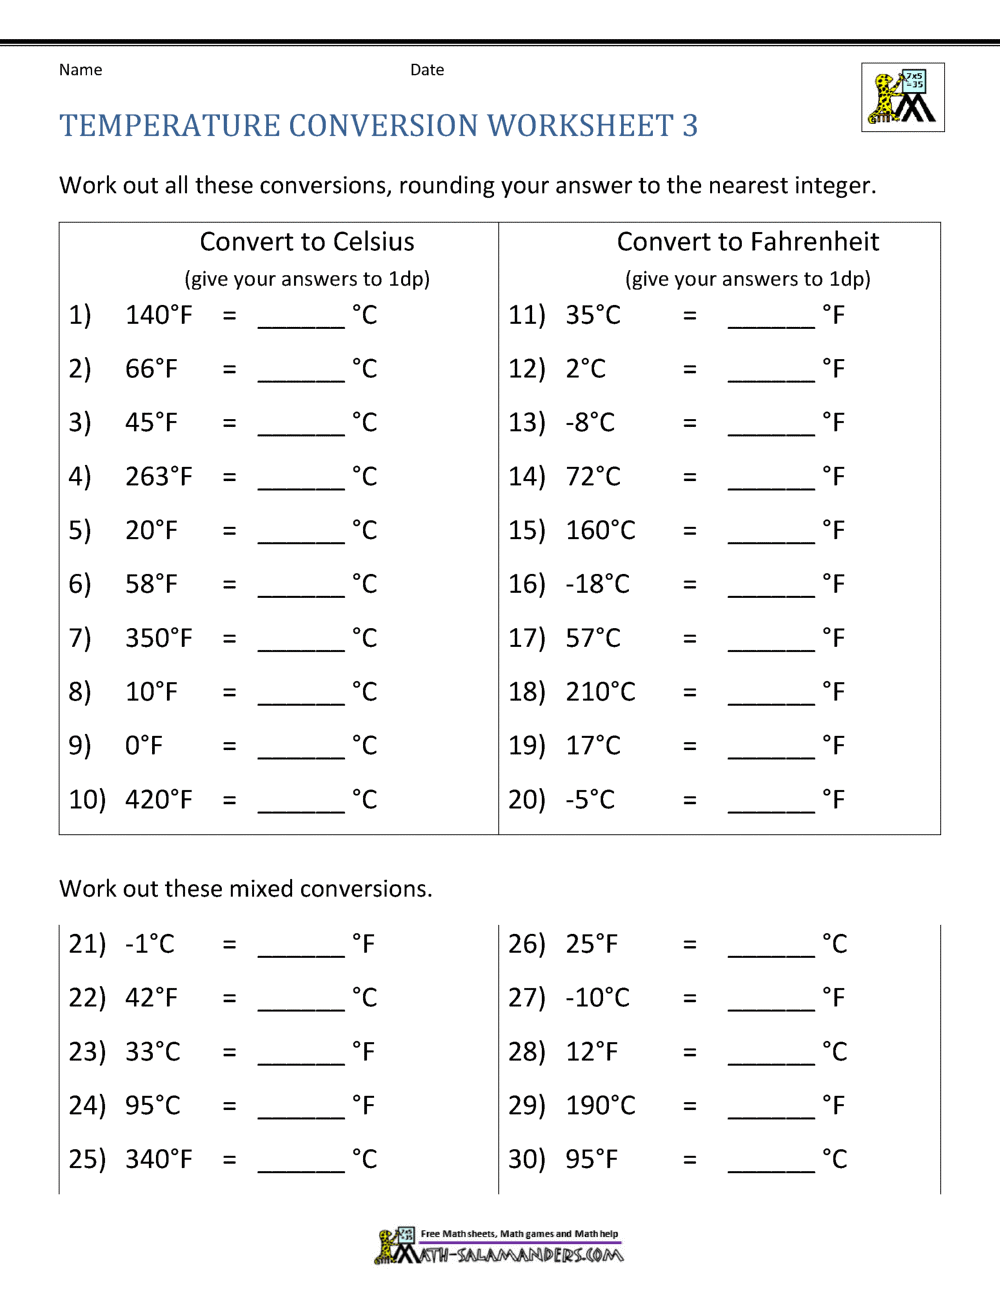 Temperature Conversion Worksheet Simply take 30 off the fahrenheit value, and then half that number. temperature conversion worksheet